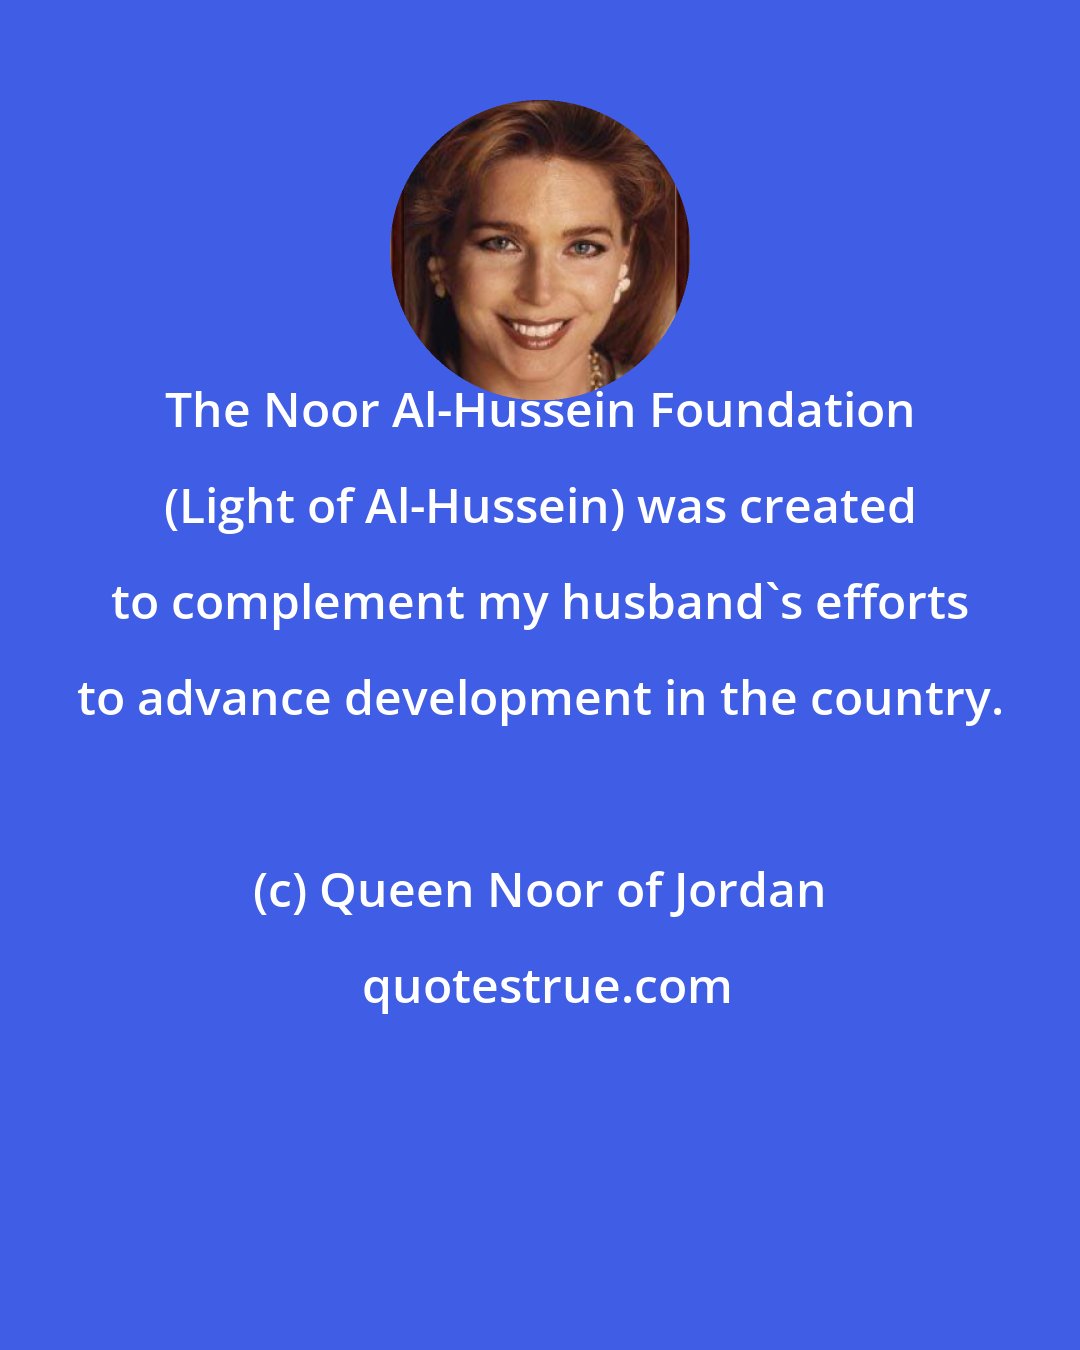 Queen Noor of Jordan: The Noor Al-Hussein Foundation (Light of Al-Hussein) was created to complement my husband's efforts to advance development in the country.